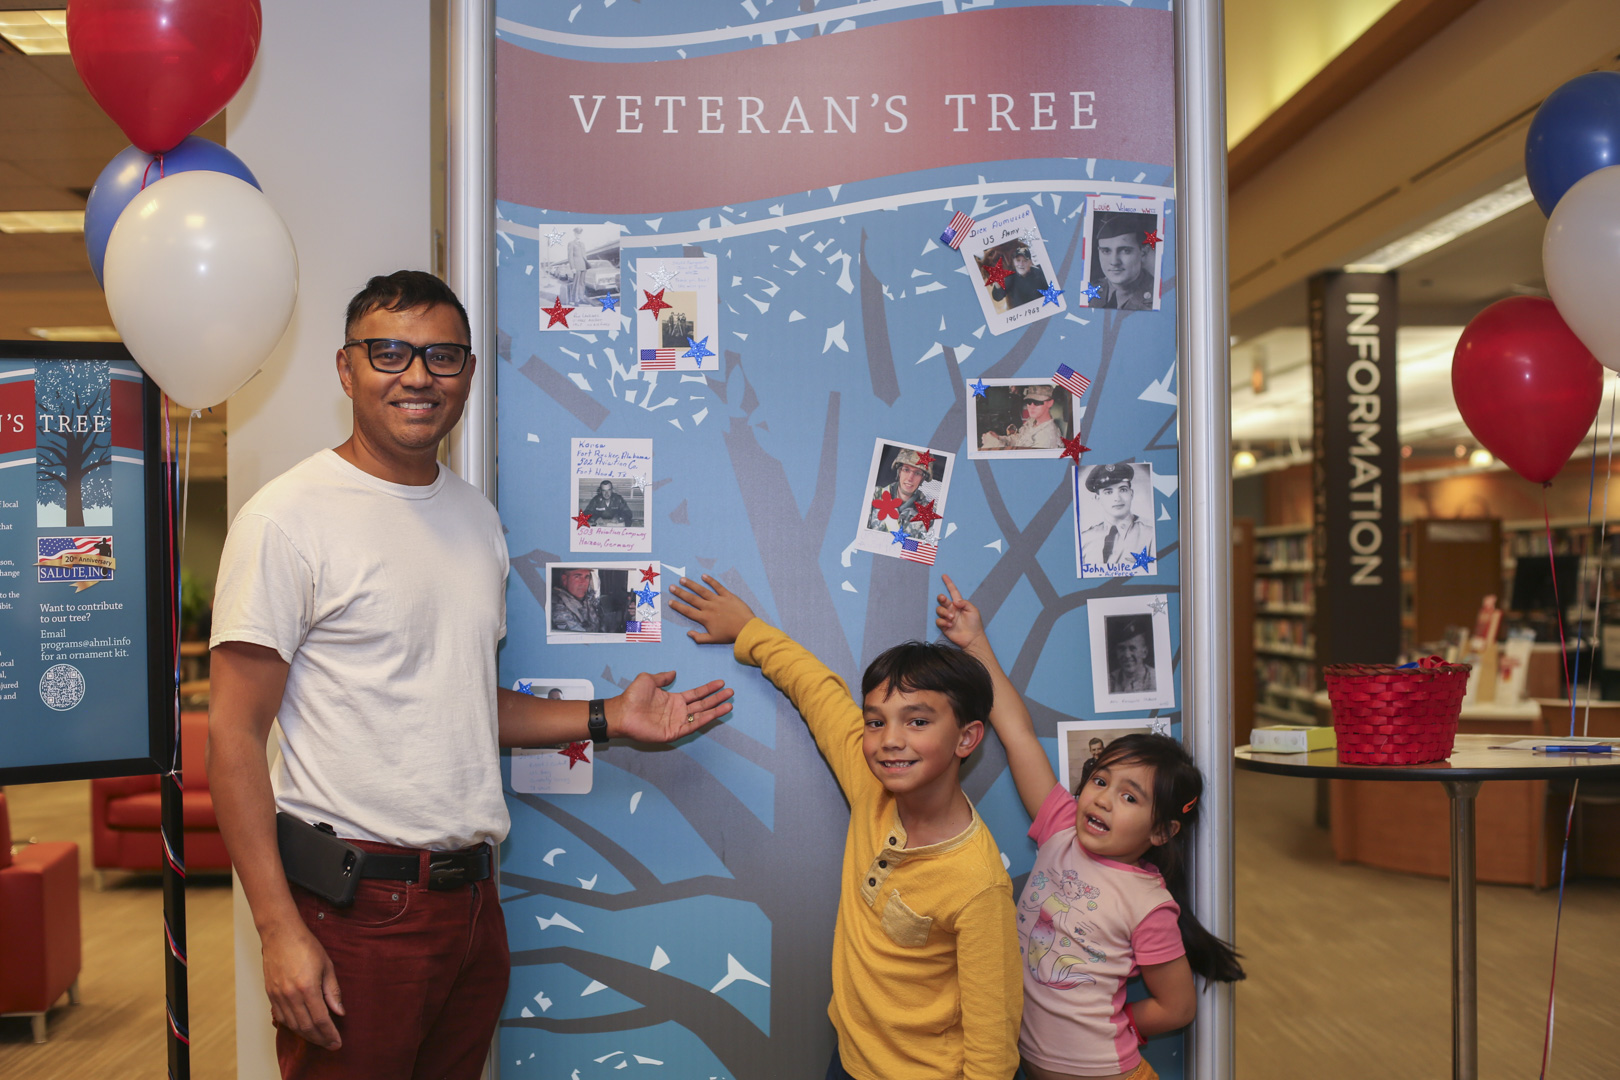 Arlington Heights Library Offers Unique Way to Celebrate Veterans